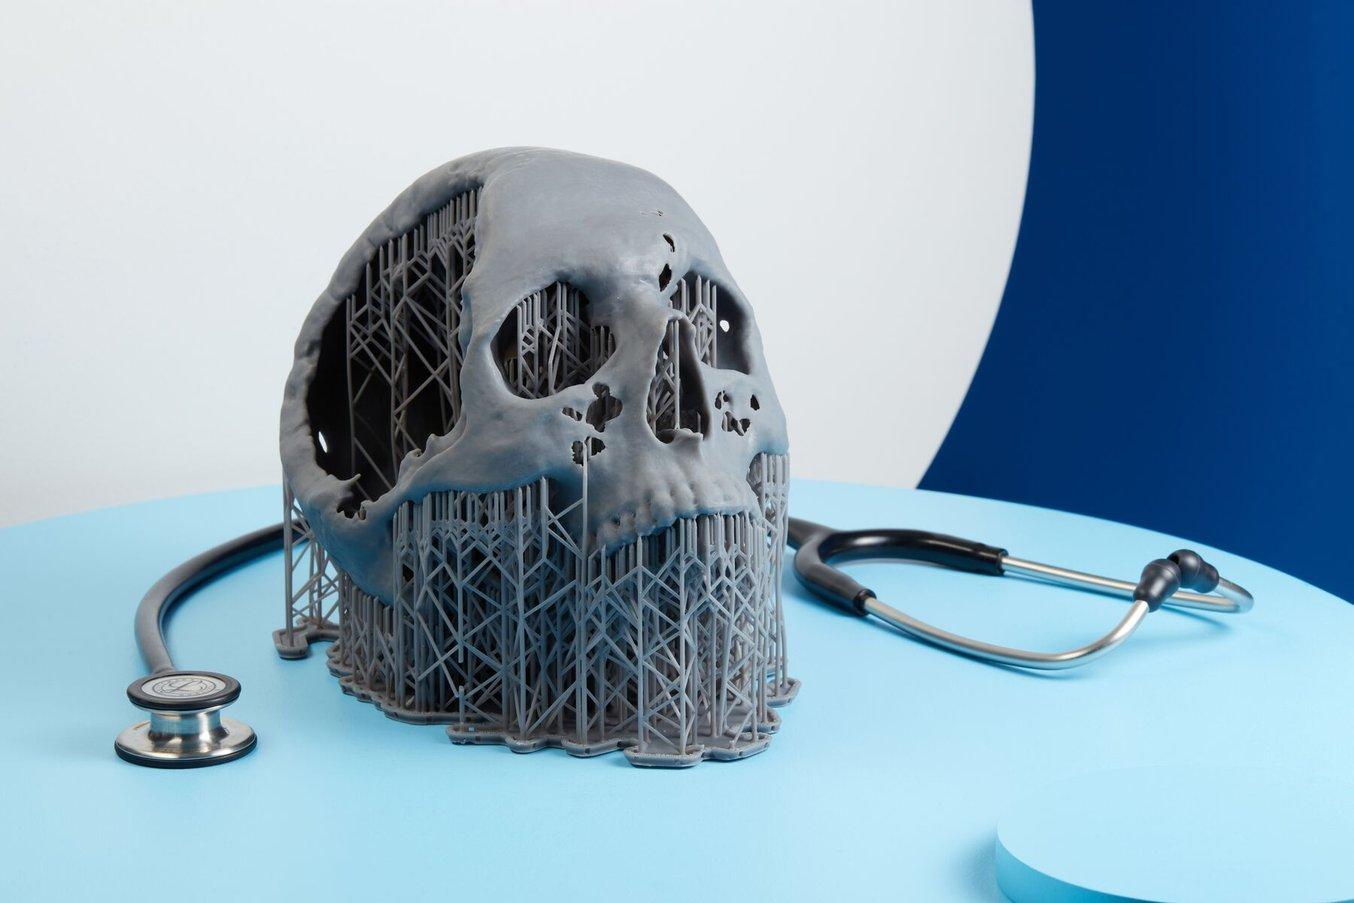 3D-printed model of a skull in medical quality